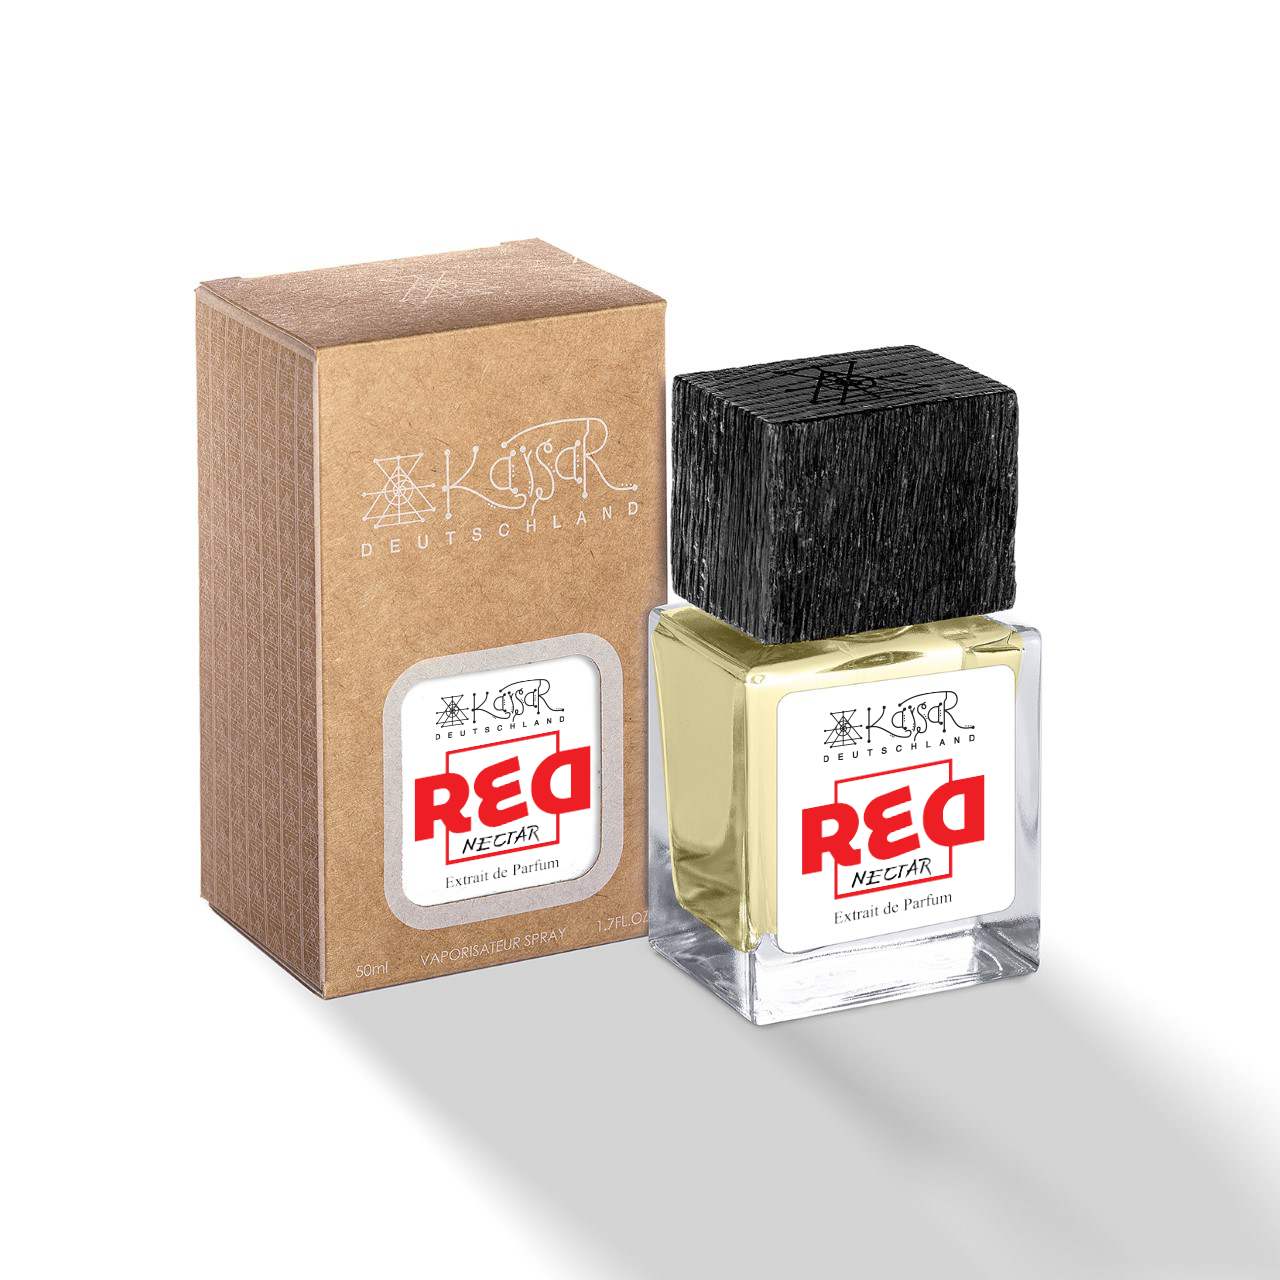 H°460 Red Nectar